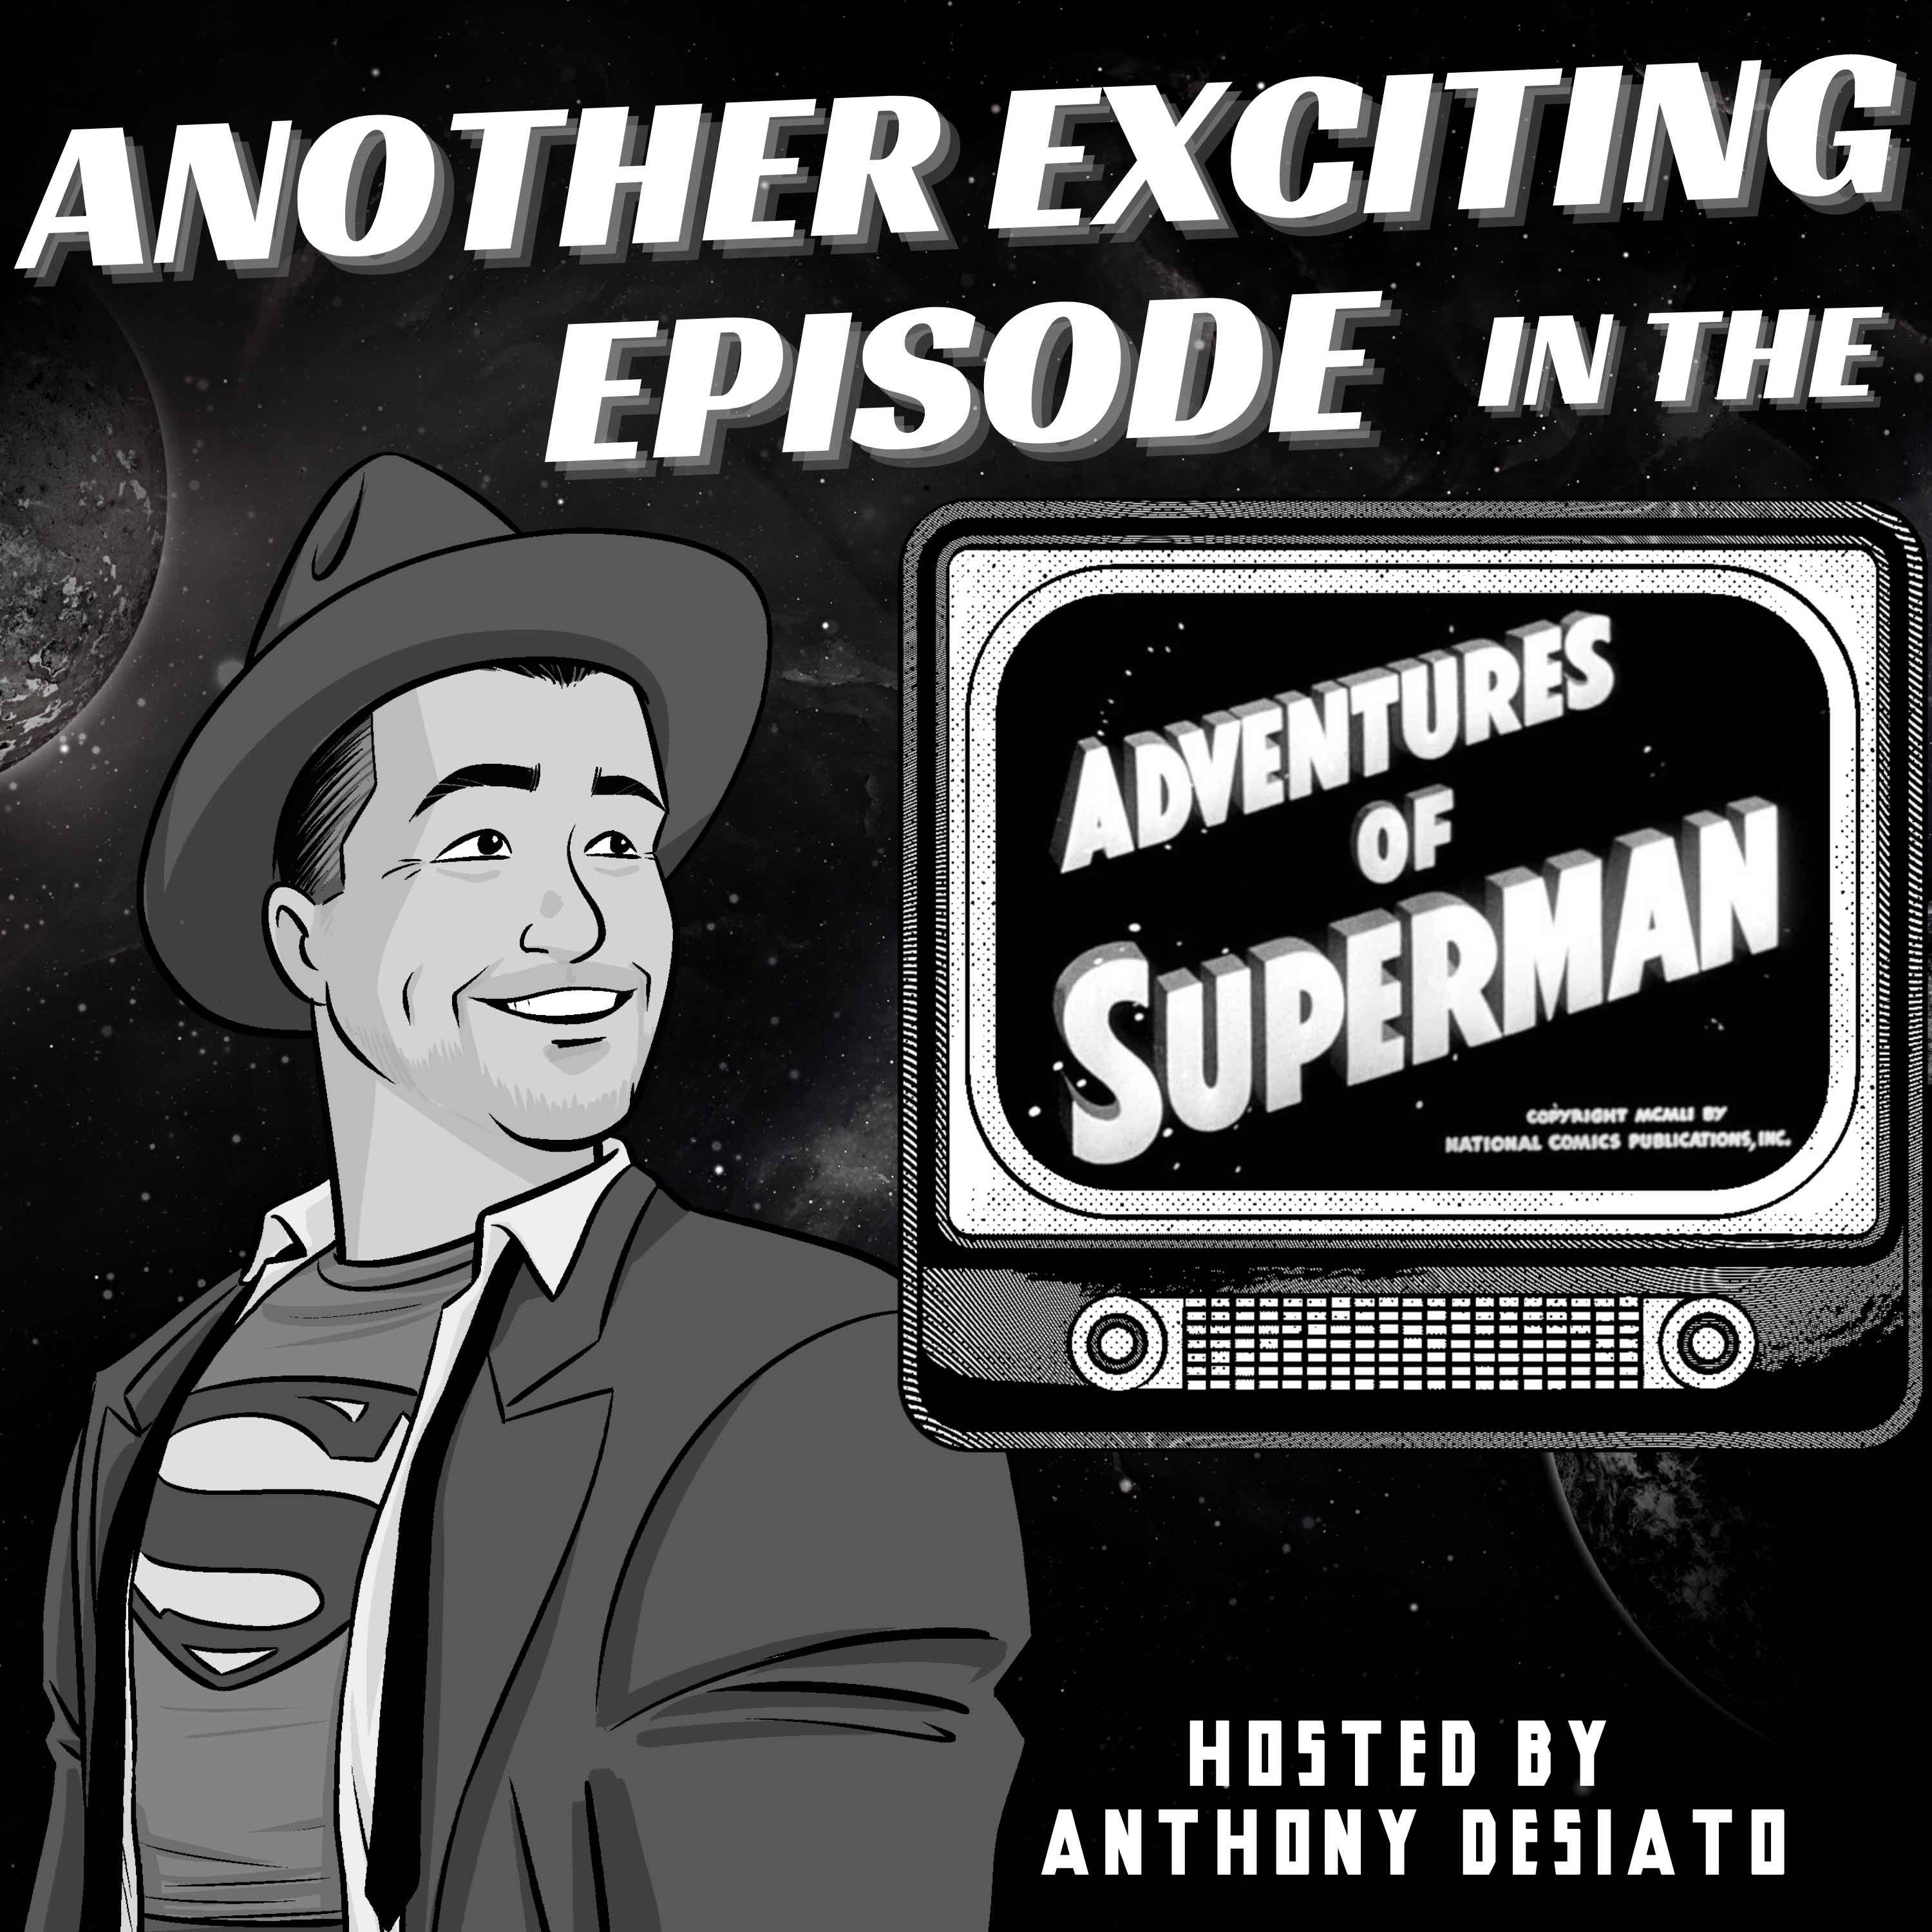 Artwork for podcast Another Exciting Episode in the Adventures of Superman